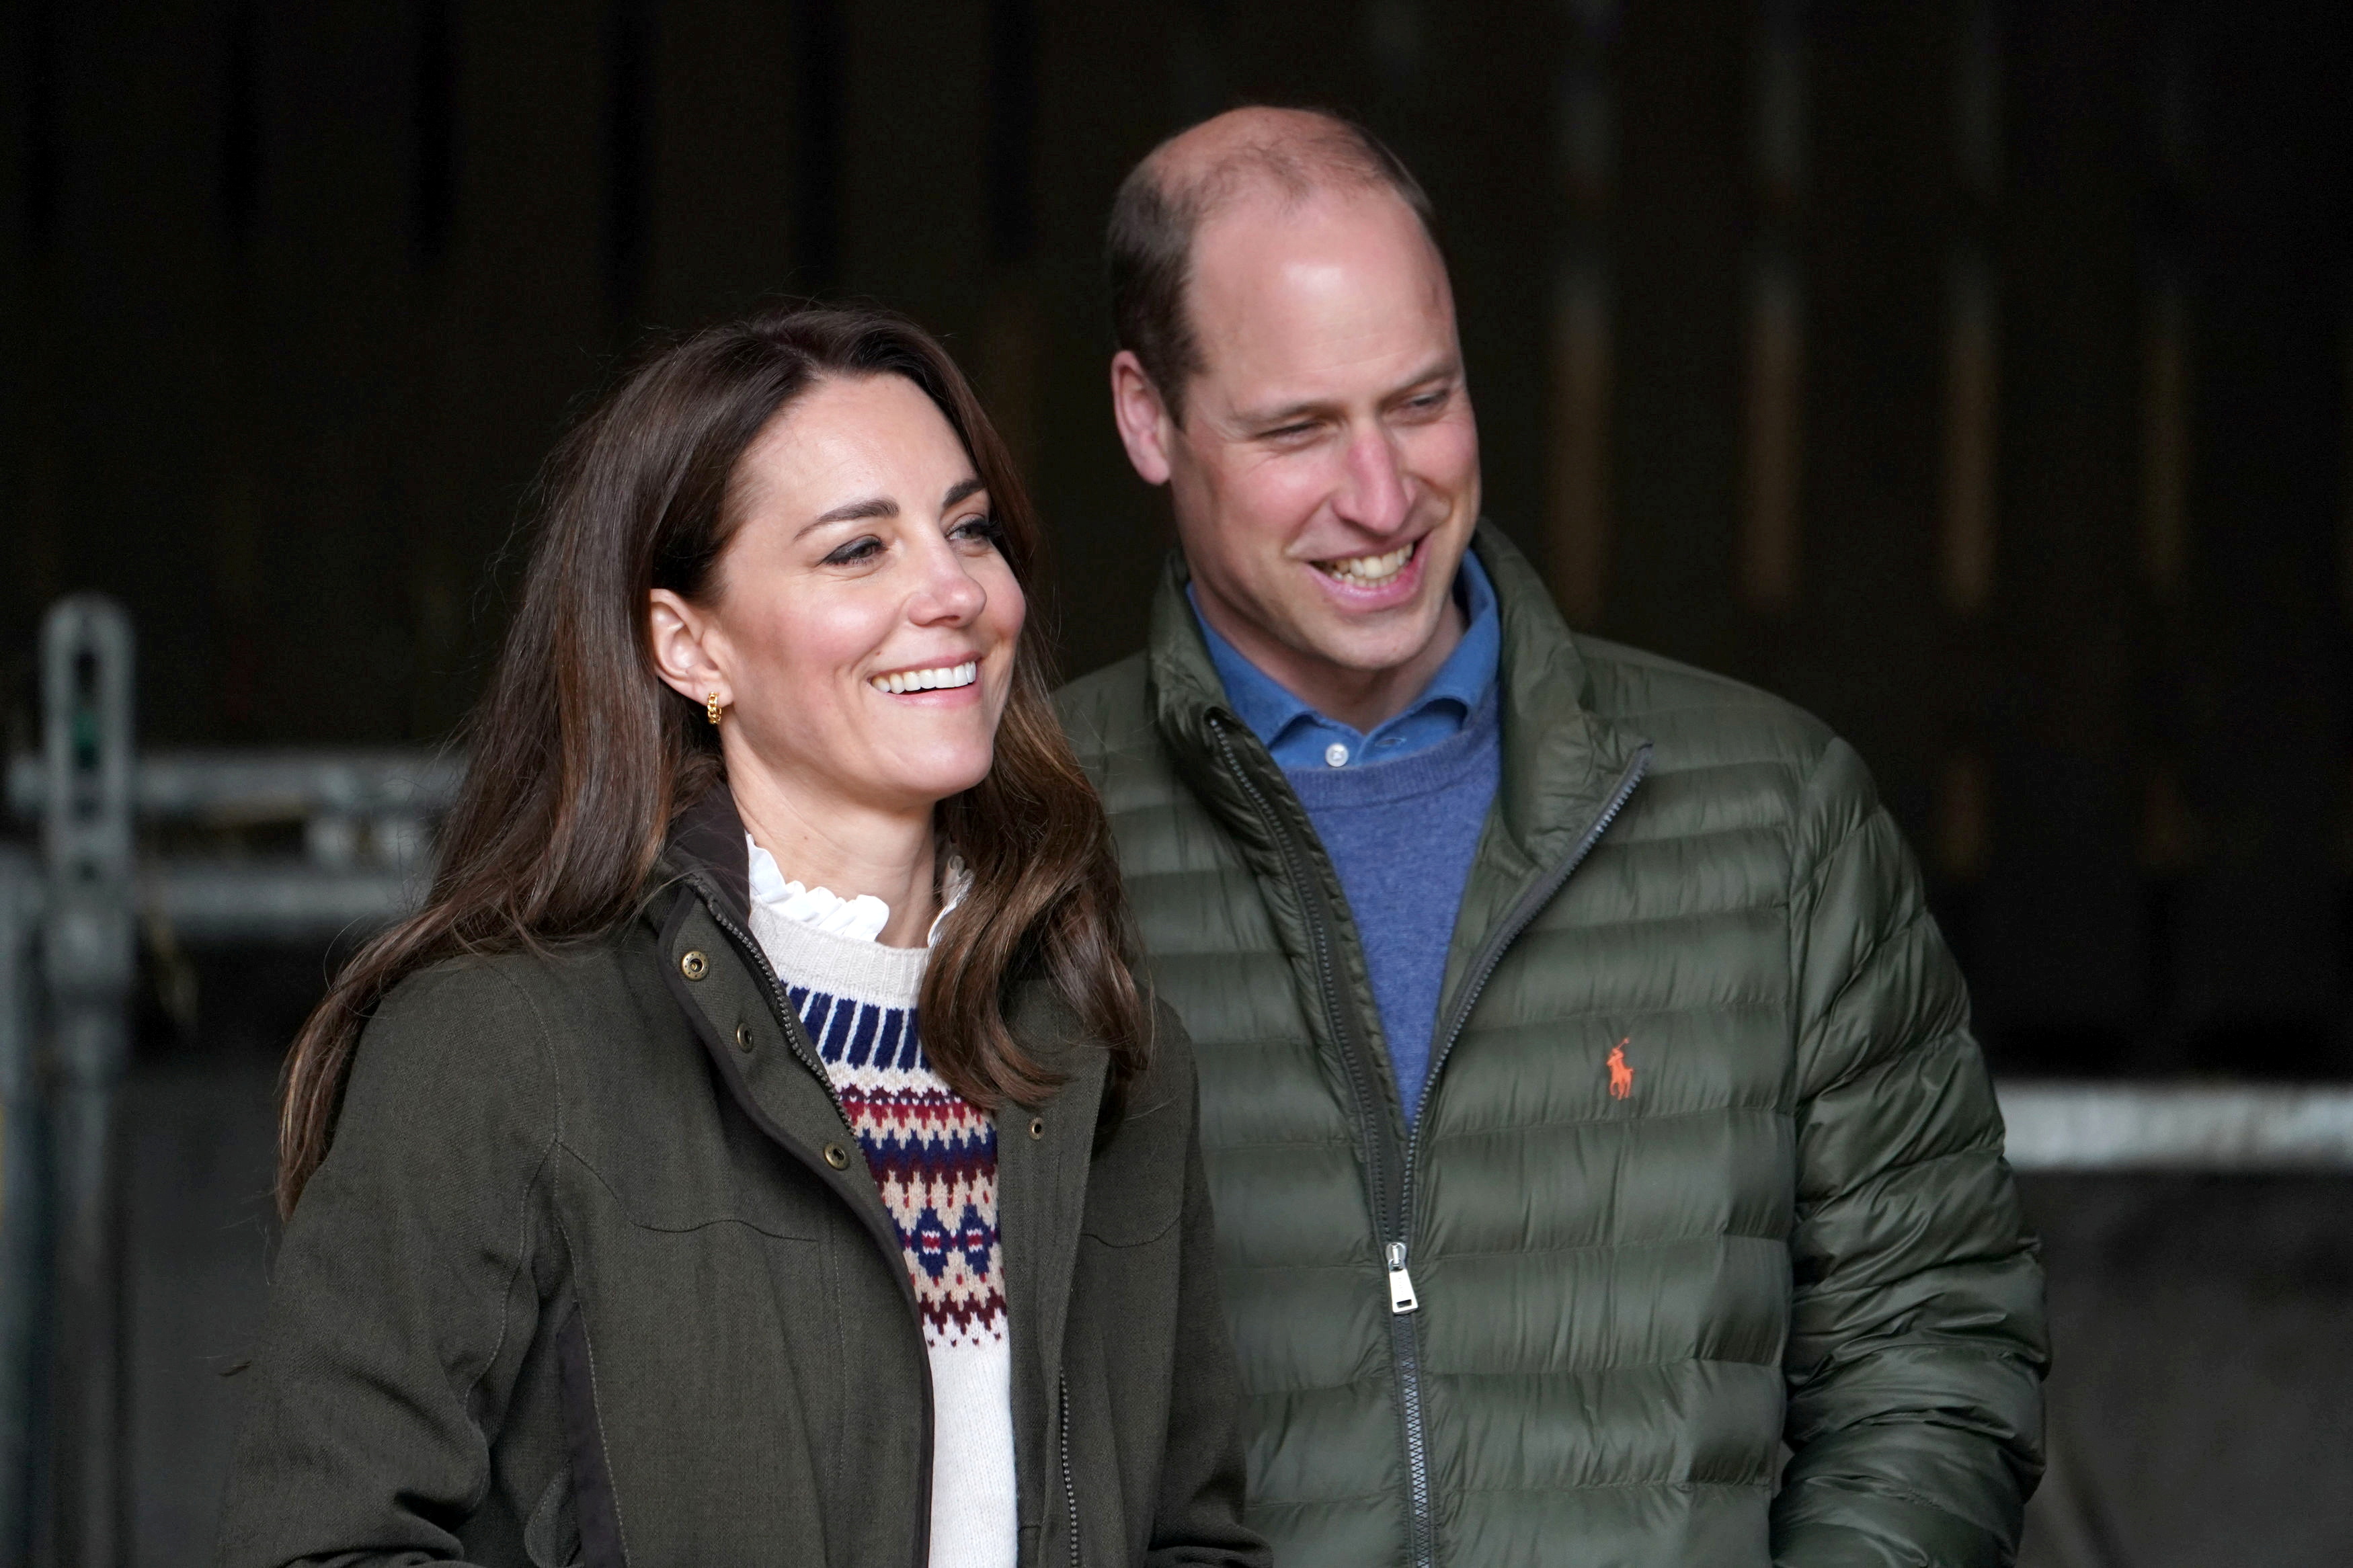 Britain's Prince William and Catherine, Duchess of Cambridge, walk together during their visit to Manor Farm in Little Stainton, Durham, Britain April 27, 2021. Owen Humphreys/PA Wire/Pool via REUTERS/File Photo